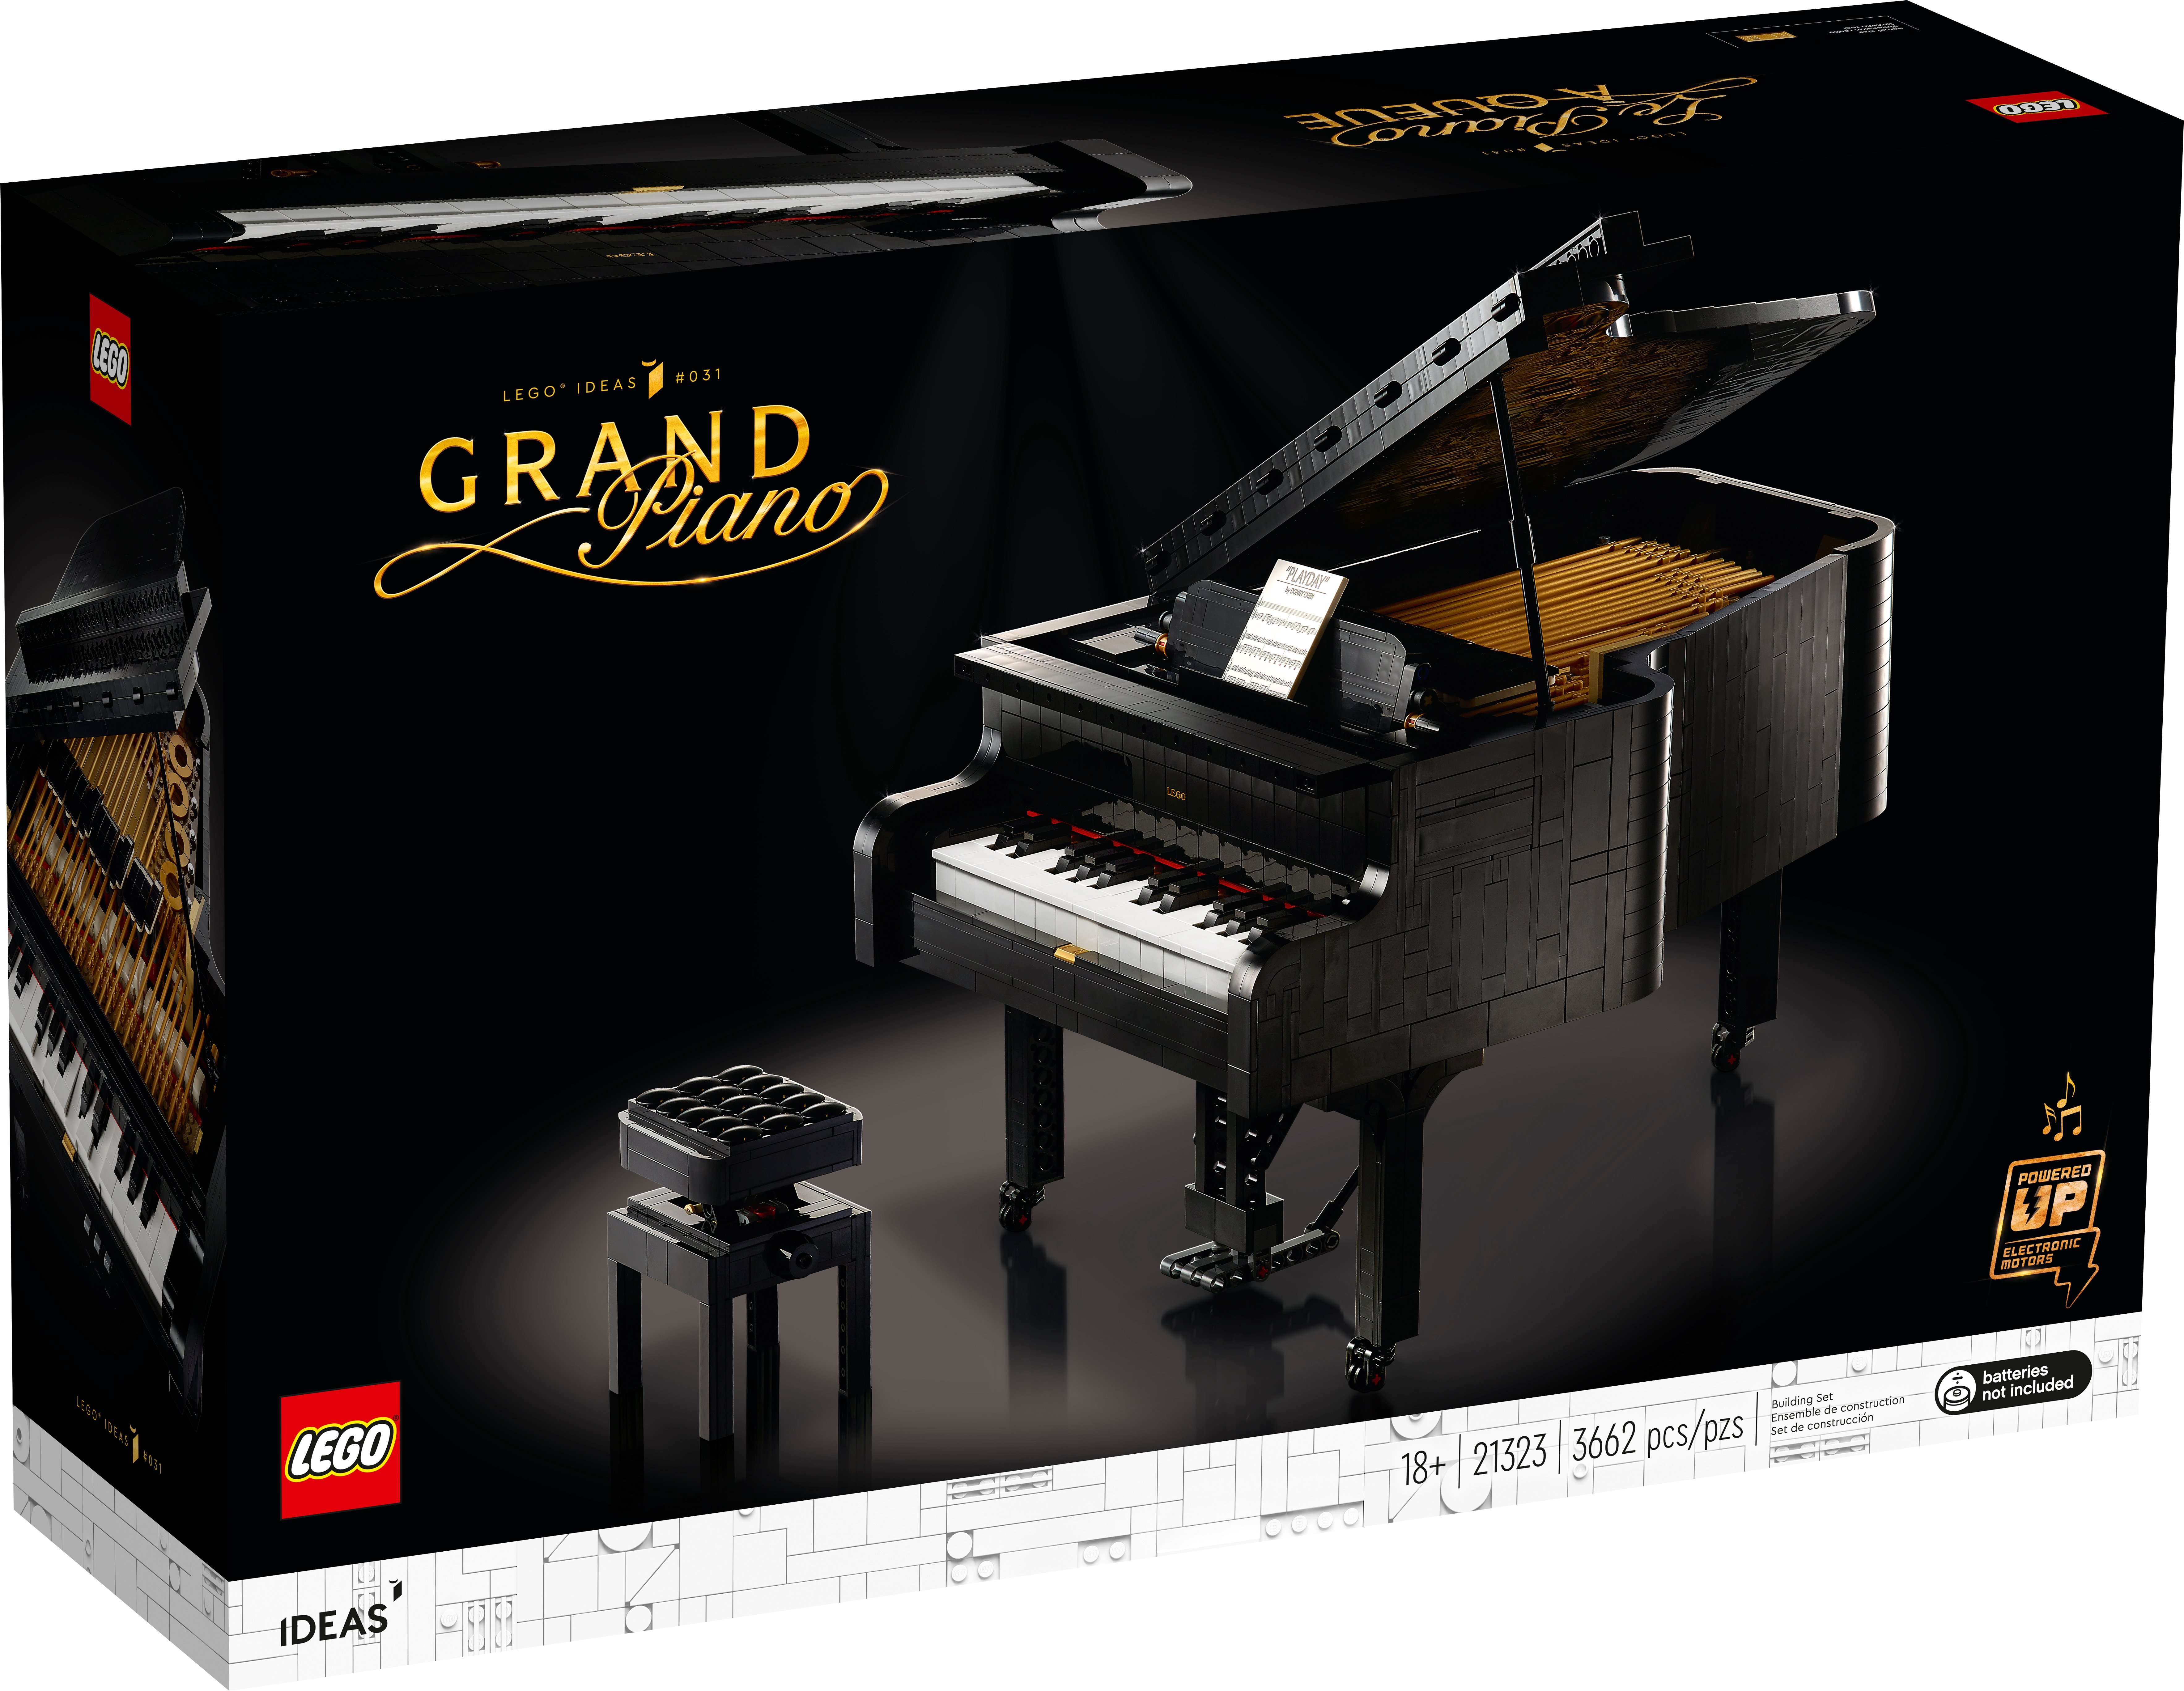 Grand piano lego chanel bags clearance sale